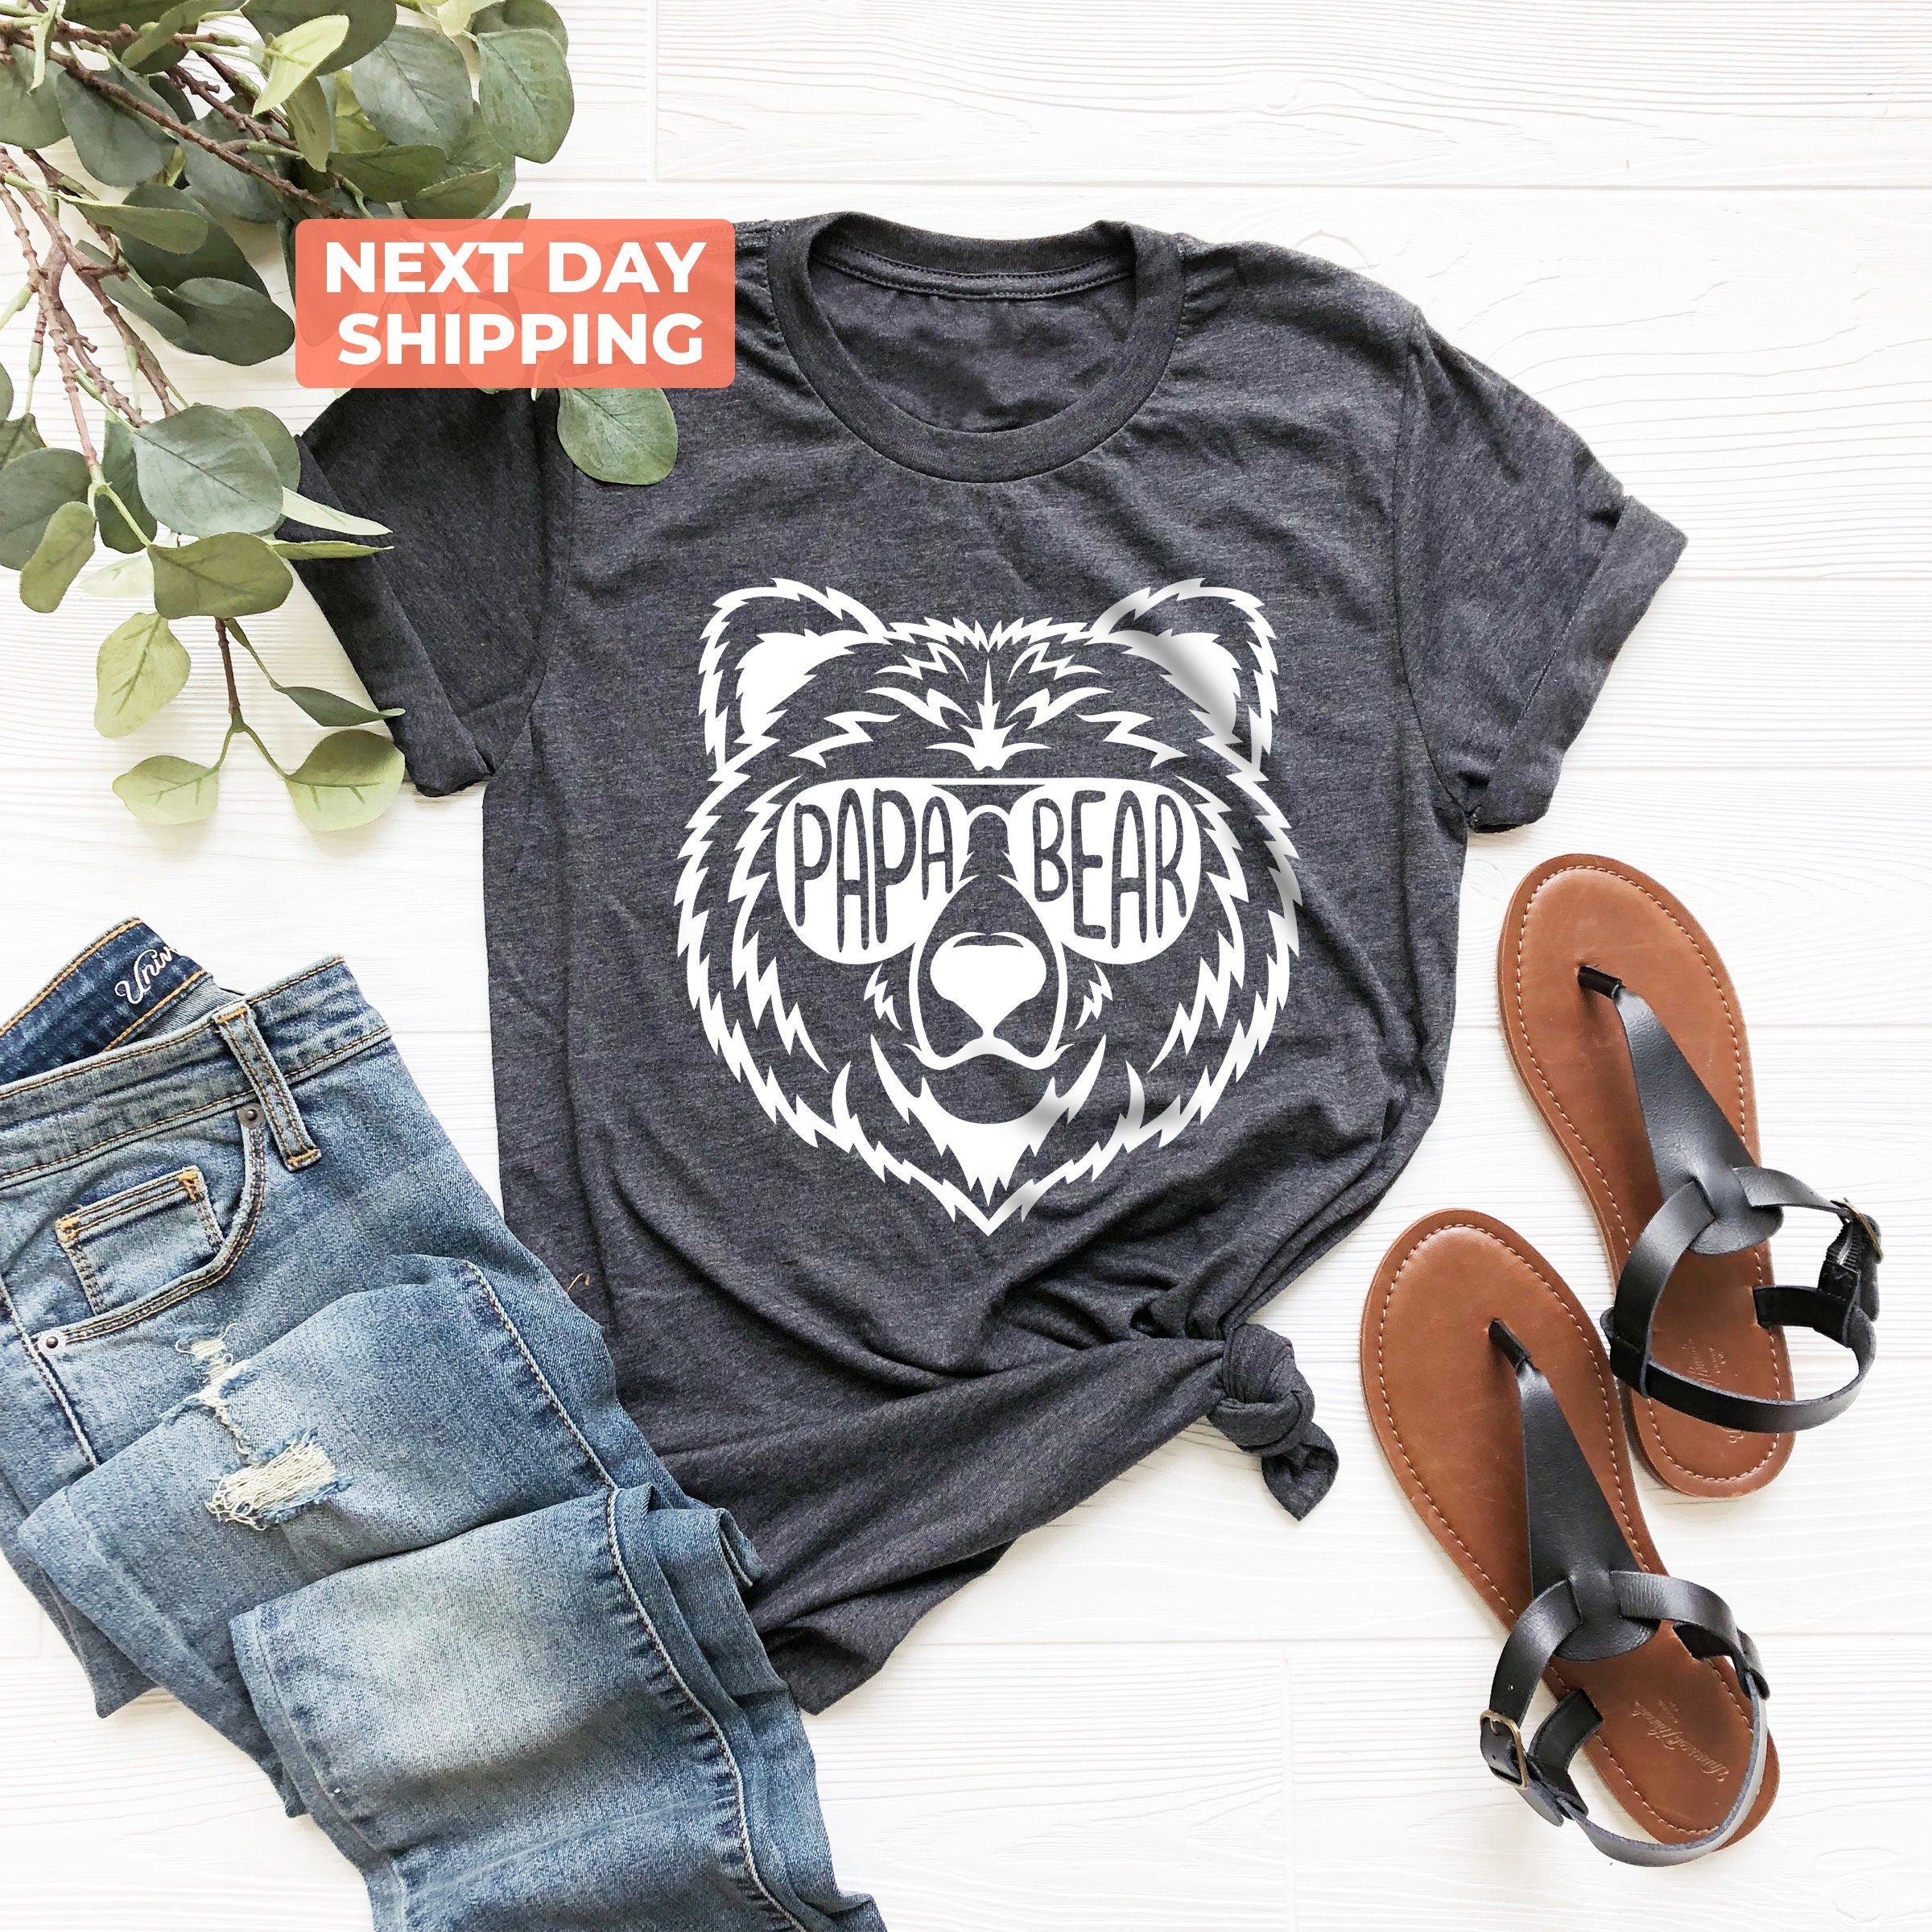 Papa Bear Sunglass Gifts For Dad That Has Everything Essential T